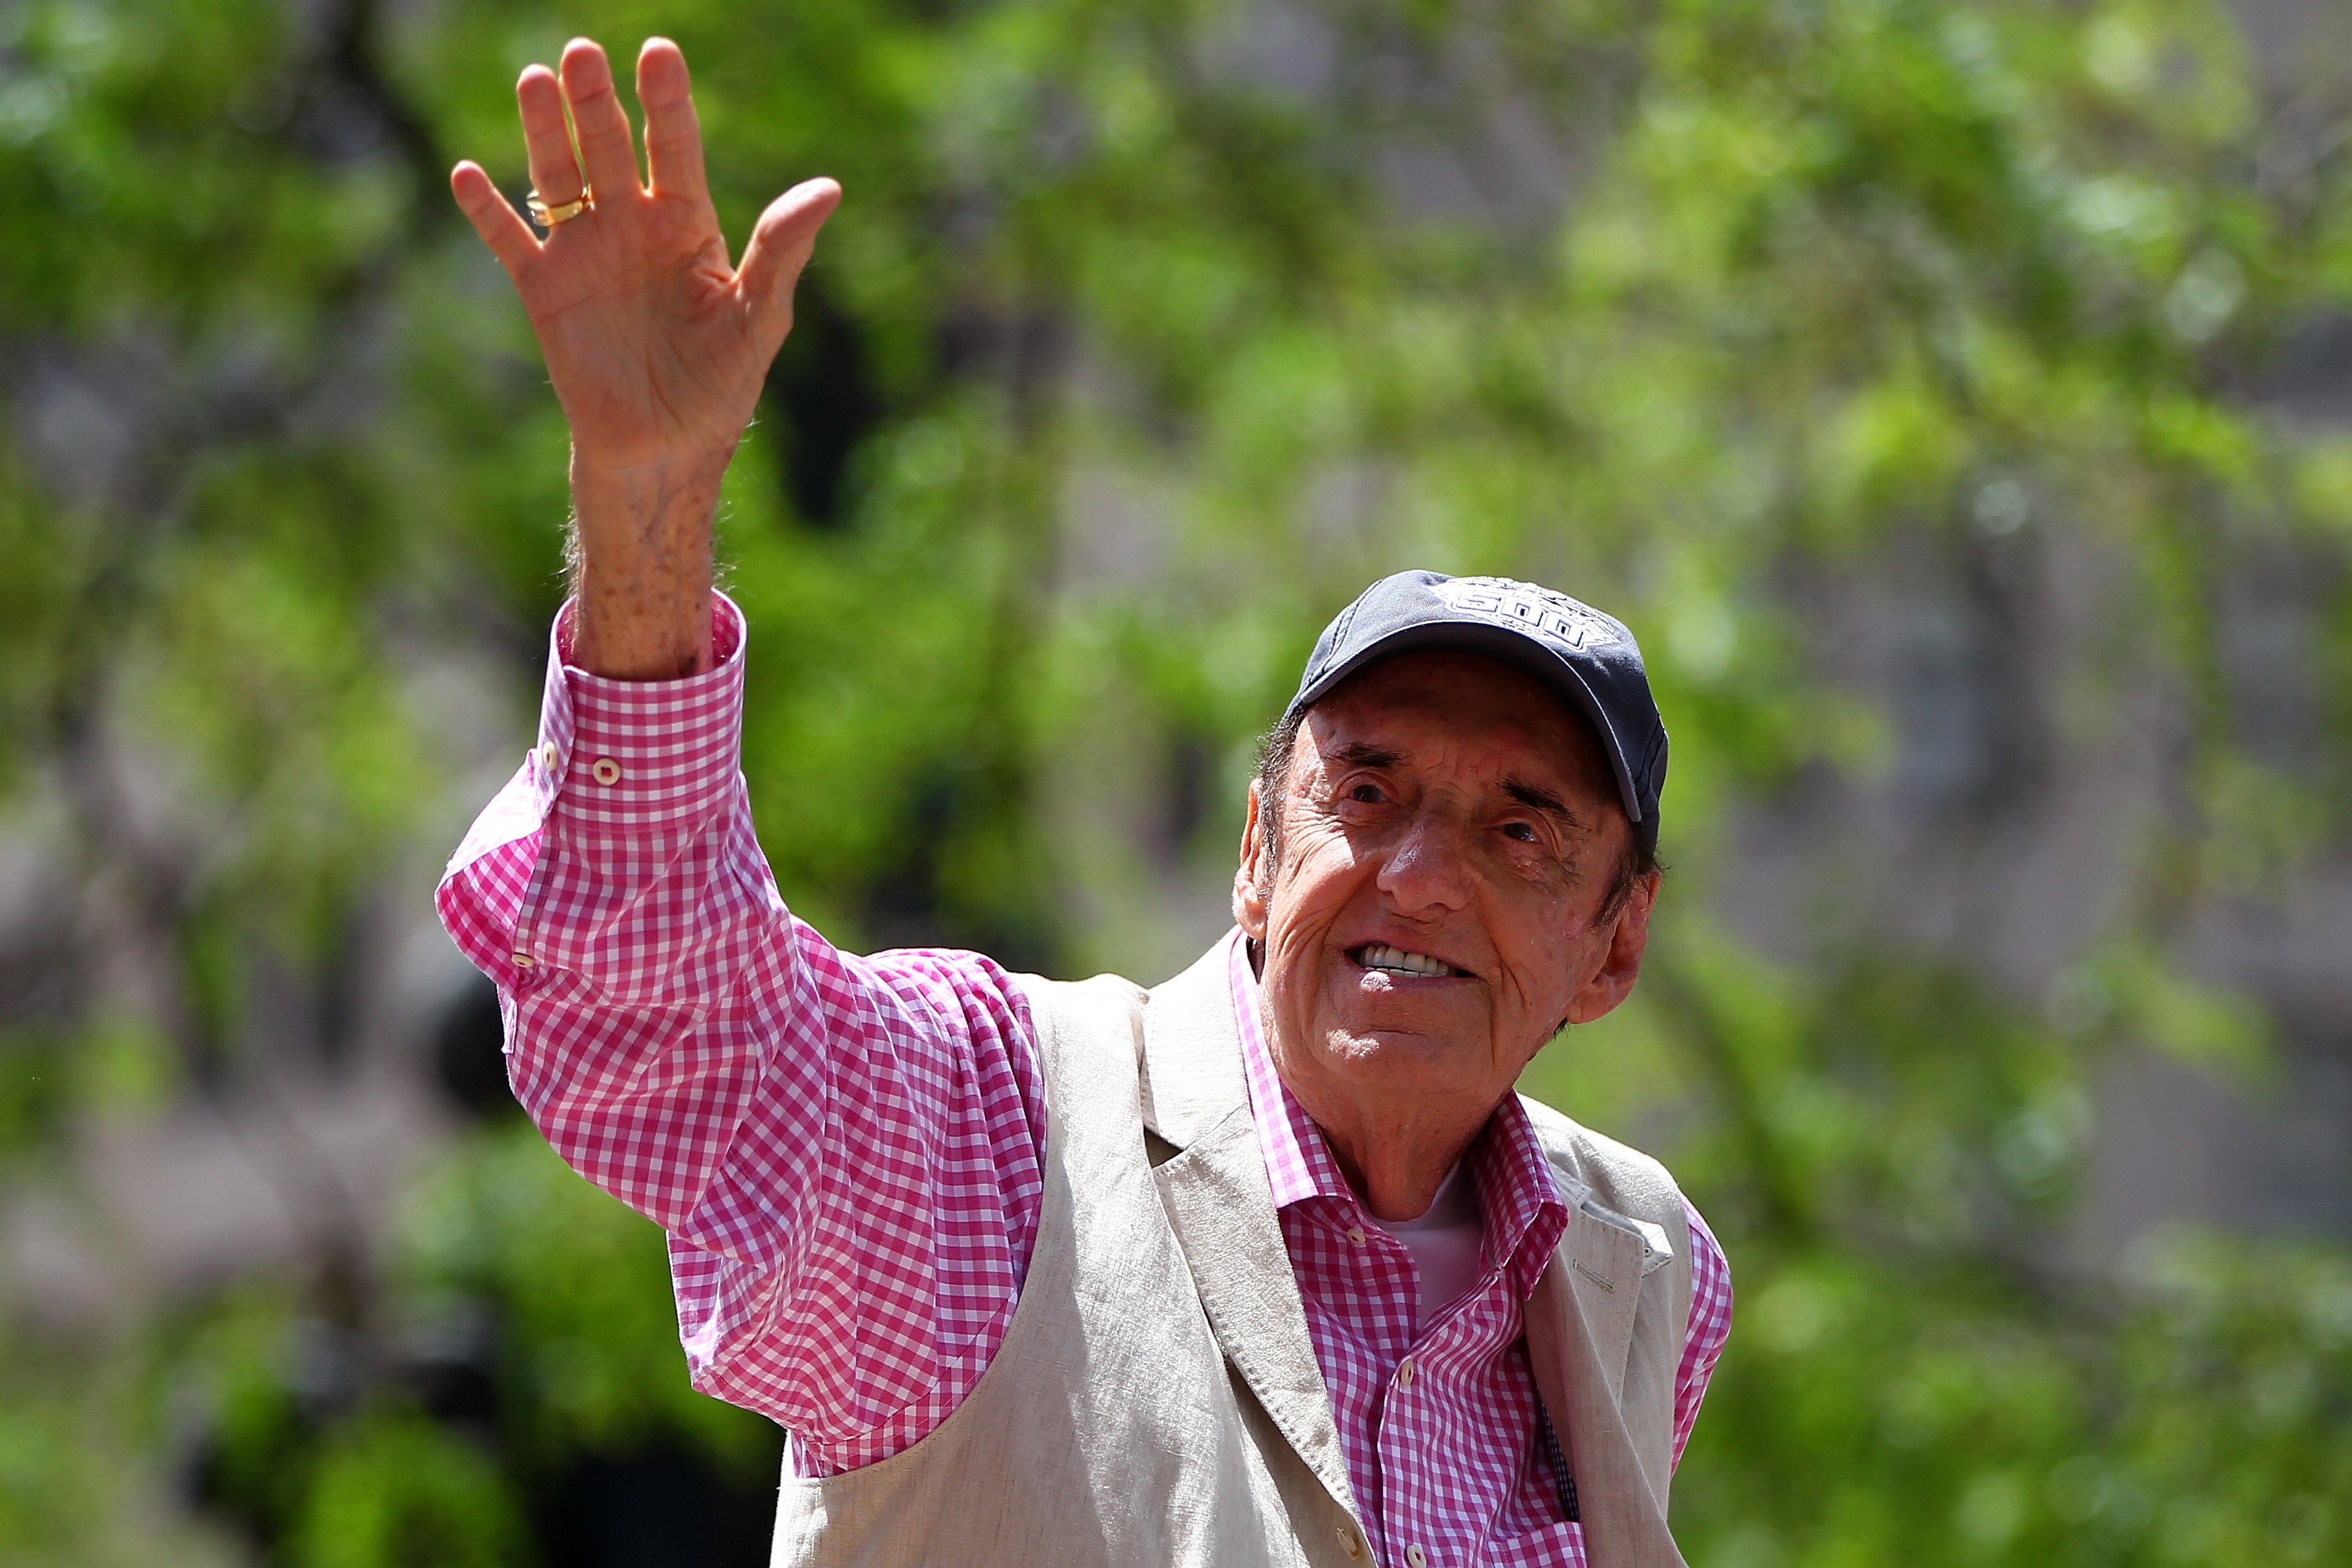 Jim Nabors waves to the crowd during the Indianapolis 500 parade on May 24, 2014 in Indianapolis, Indiana.  | Source: Getty Images